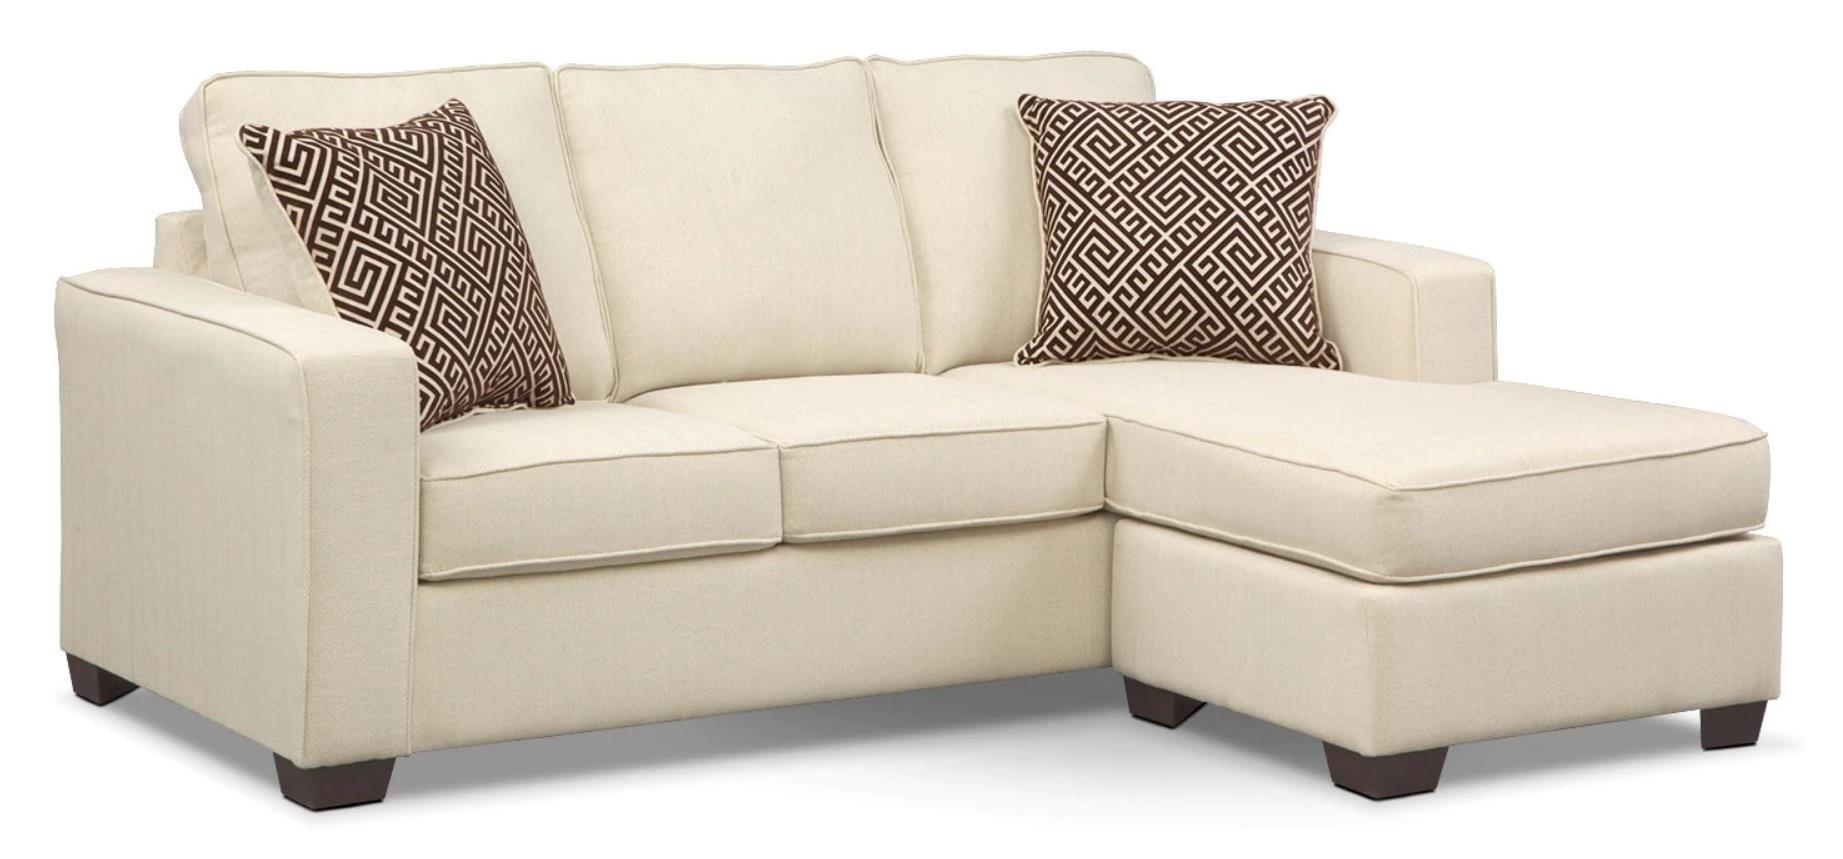 9472 Sofa with Reversible Chaise in Beige Fabric $529.99